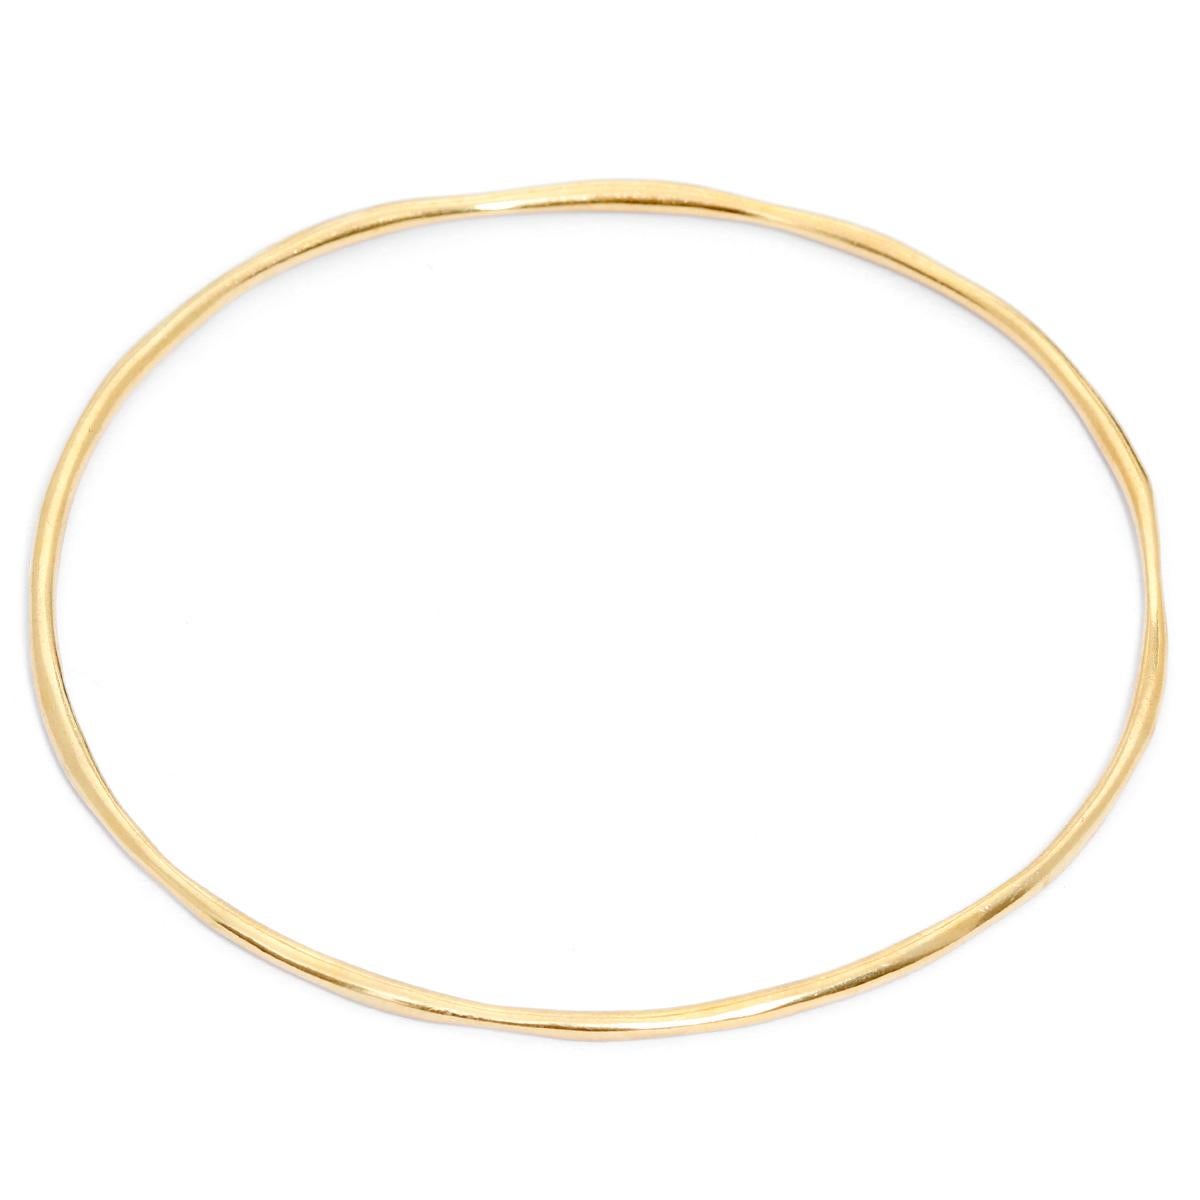 Ippolita Yellow Gold Bangle Bracelet In Excellent Condition For Sale In Dallas, TX